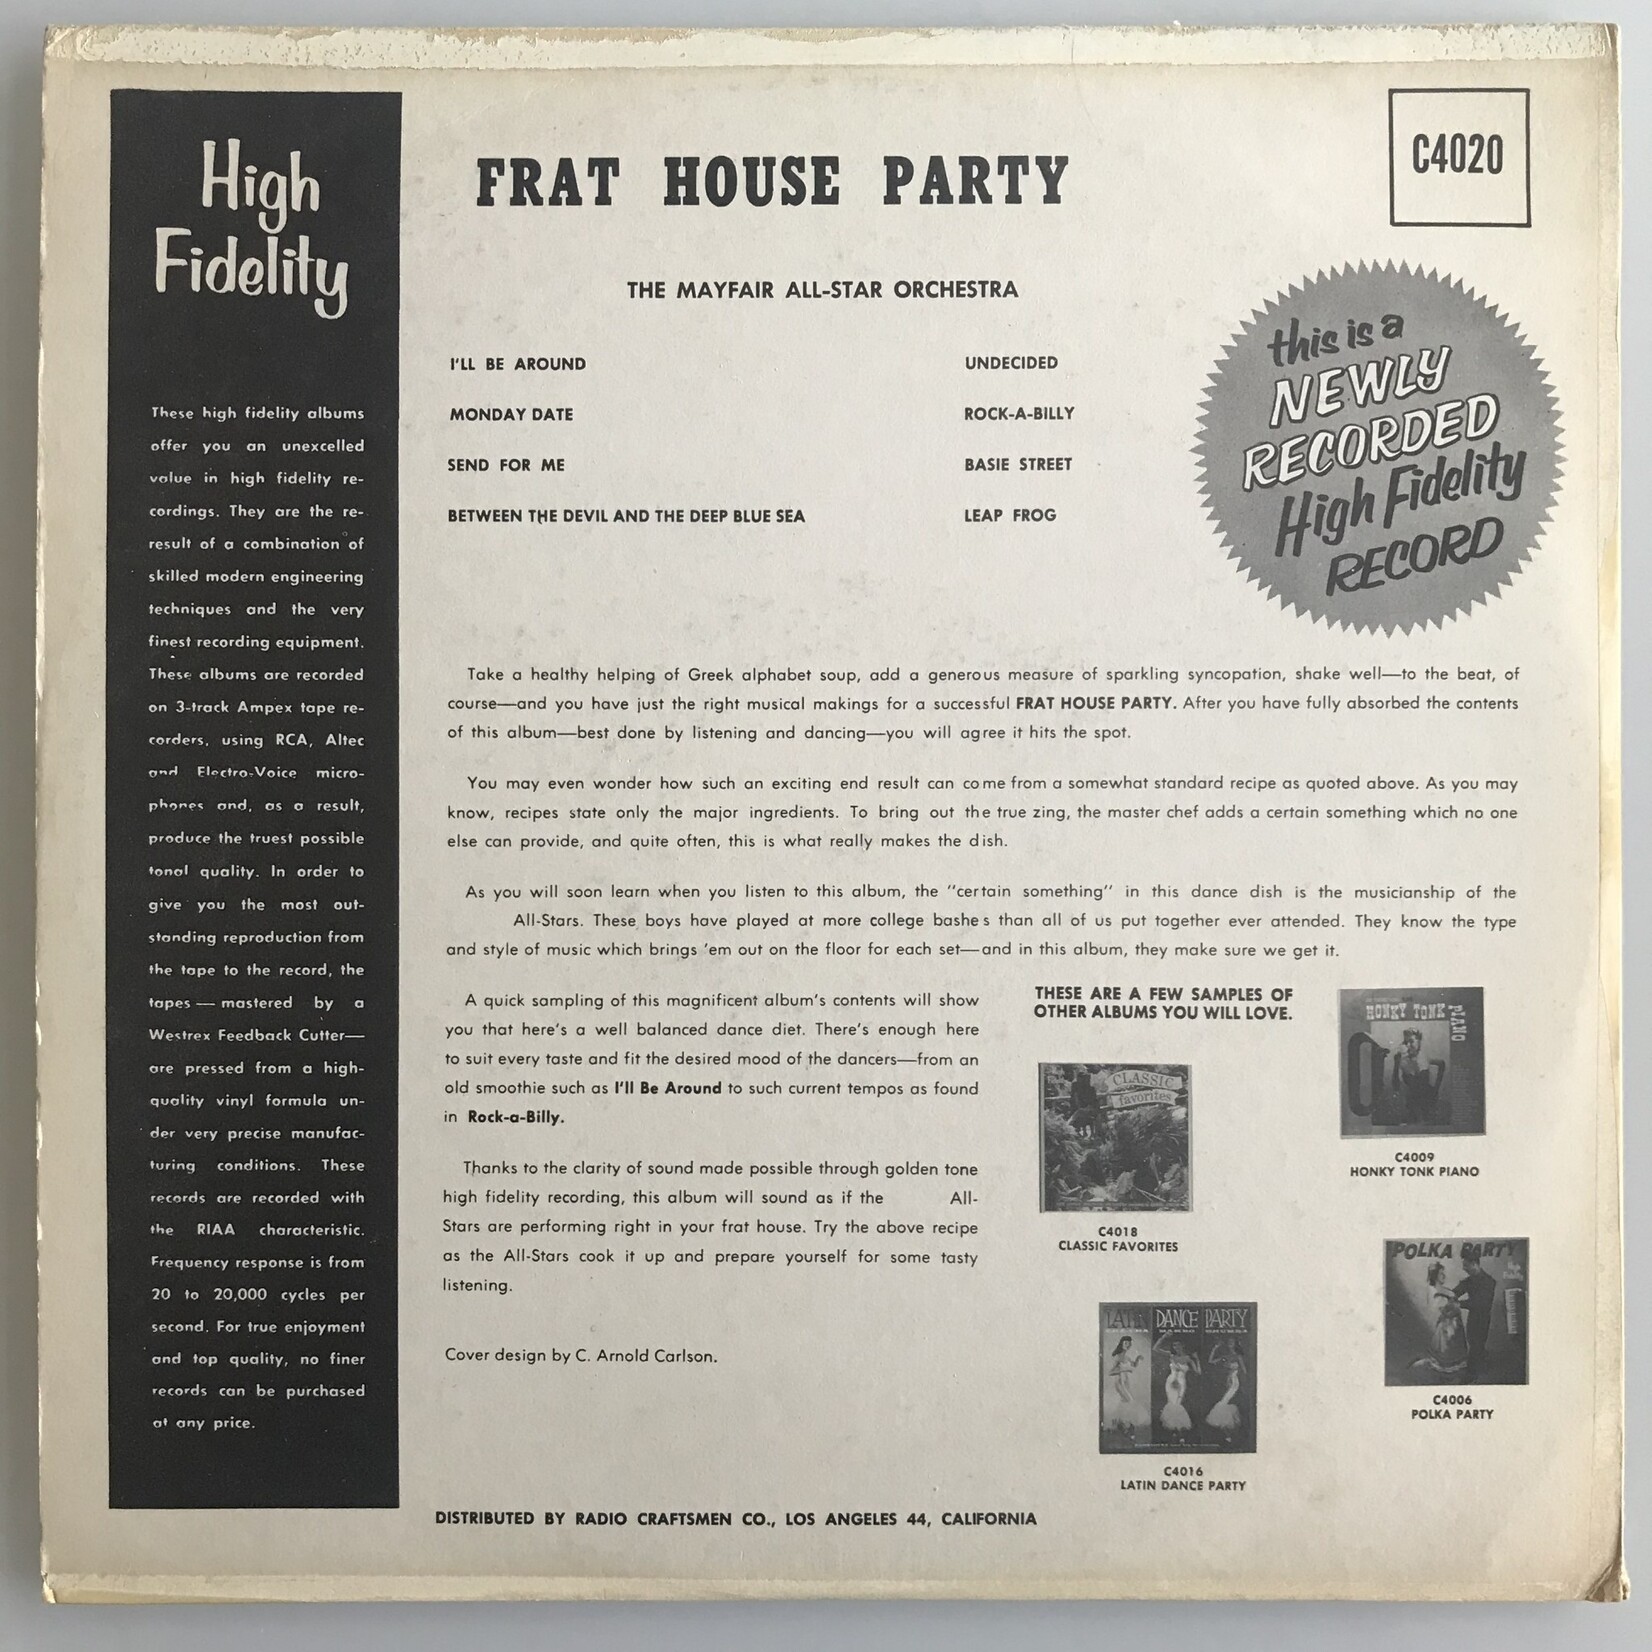 Mayfair All-Star Orchestra - Frat House Party - Vinyl LP (USED)